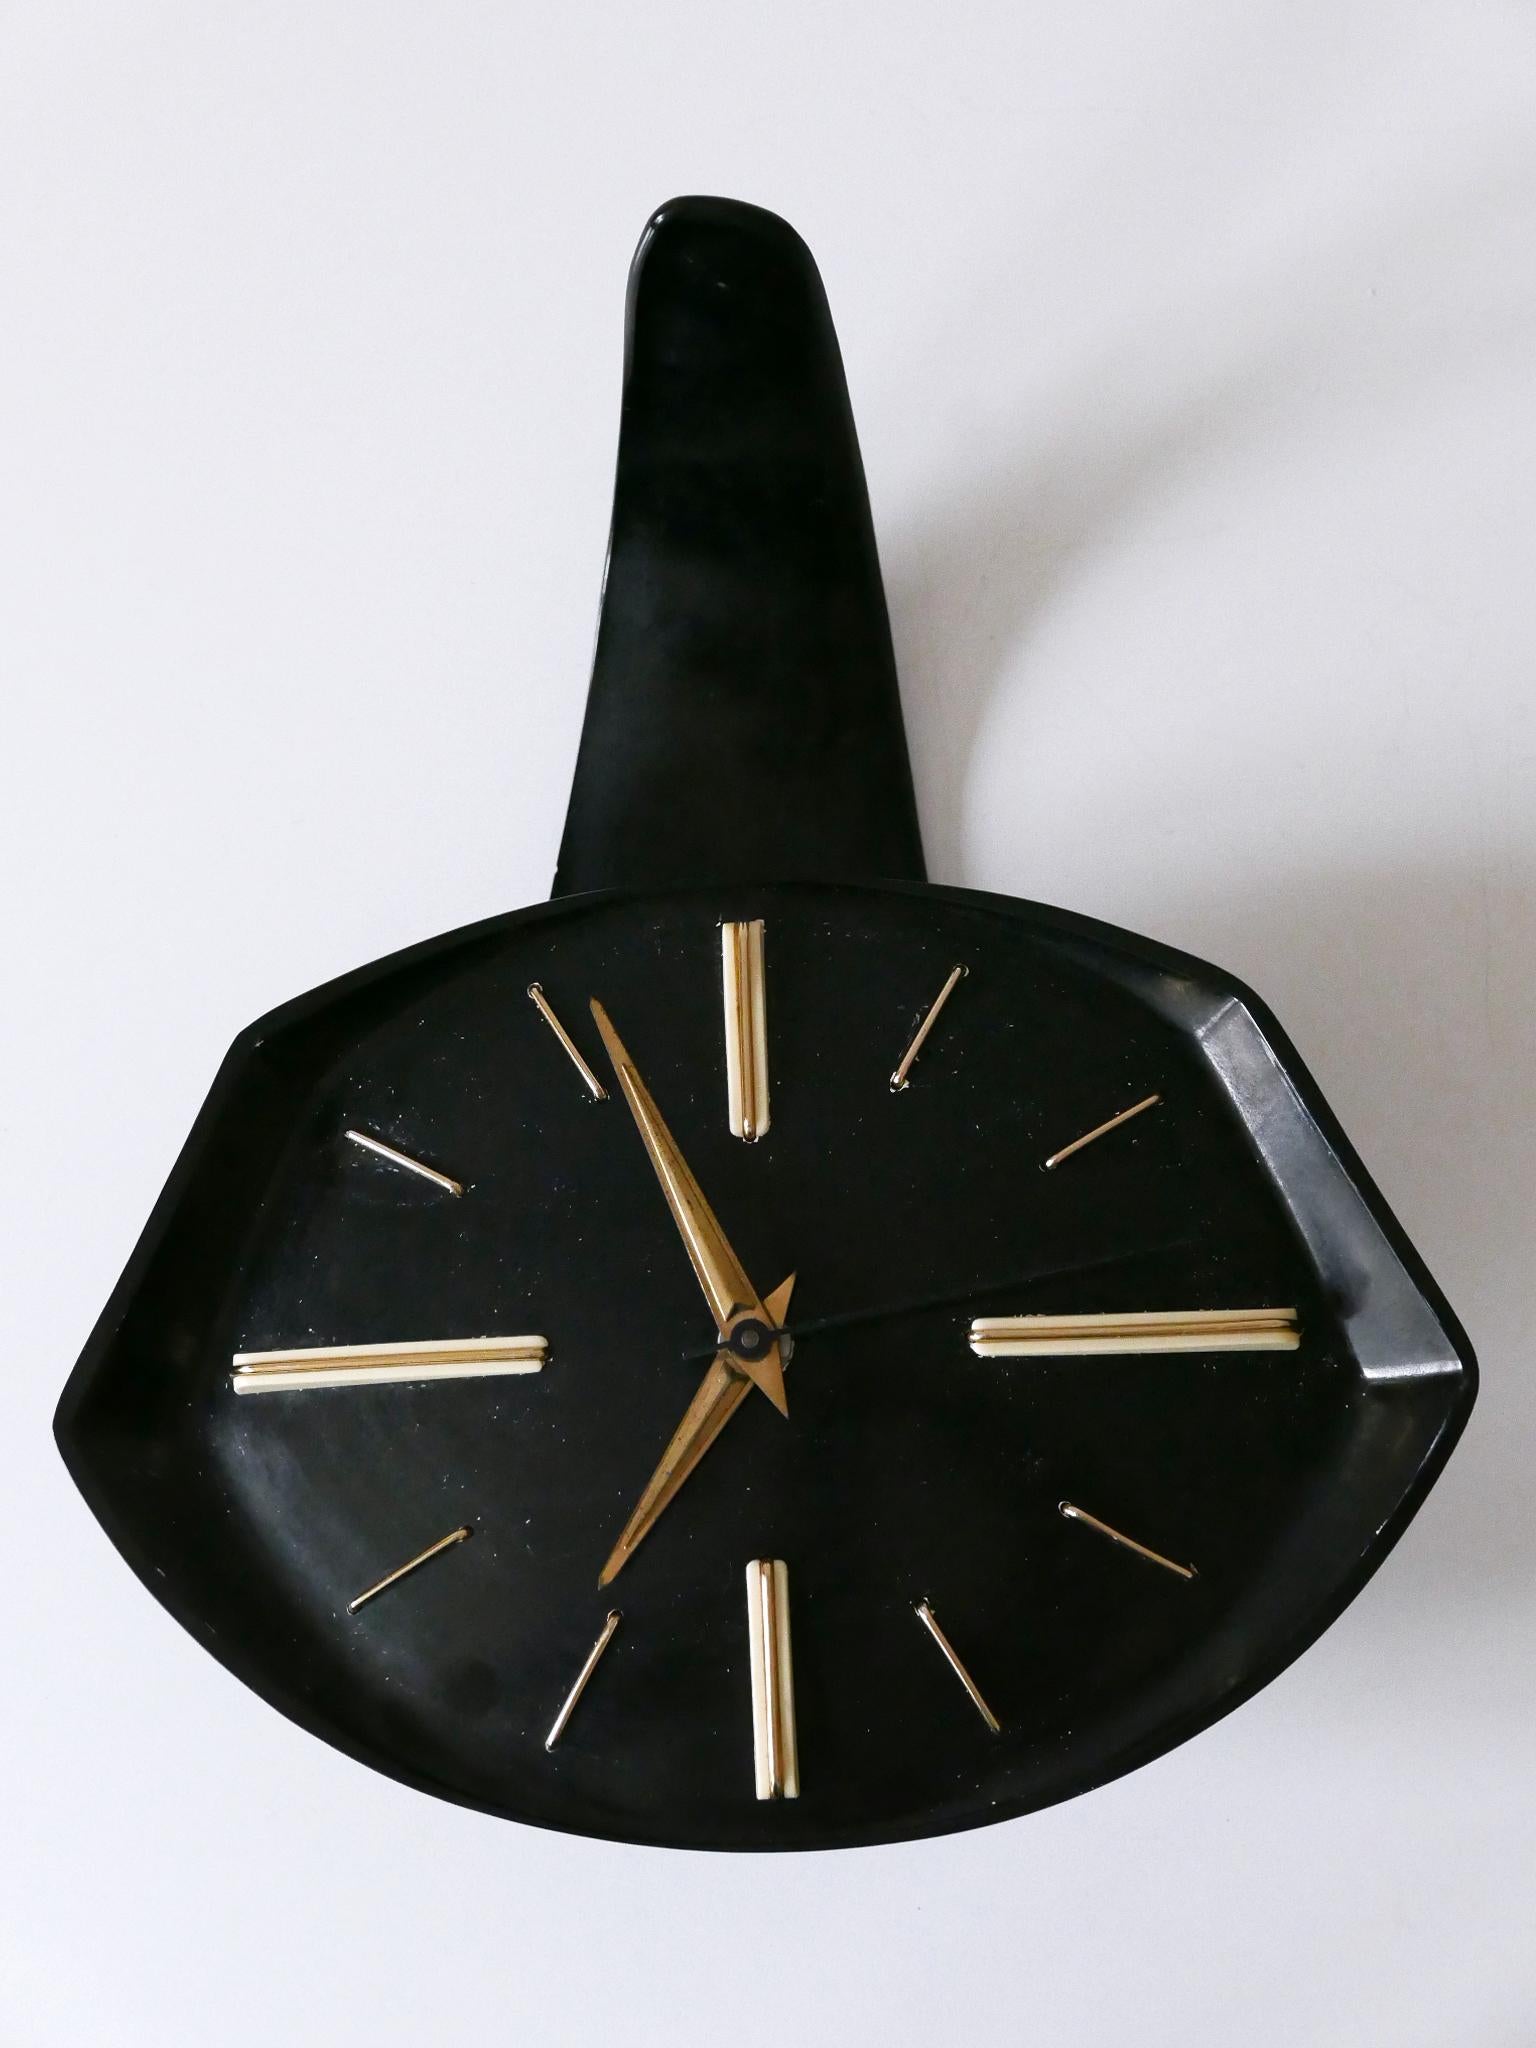 Rare and Lovely Mid-Century Modern Bakelite Table or Wall Clock by PRIM 1950s For Sale 1